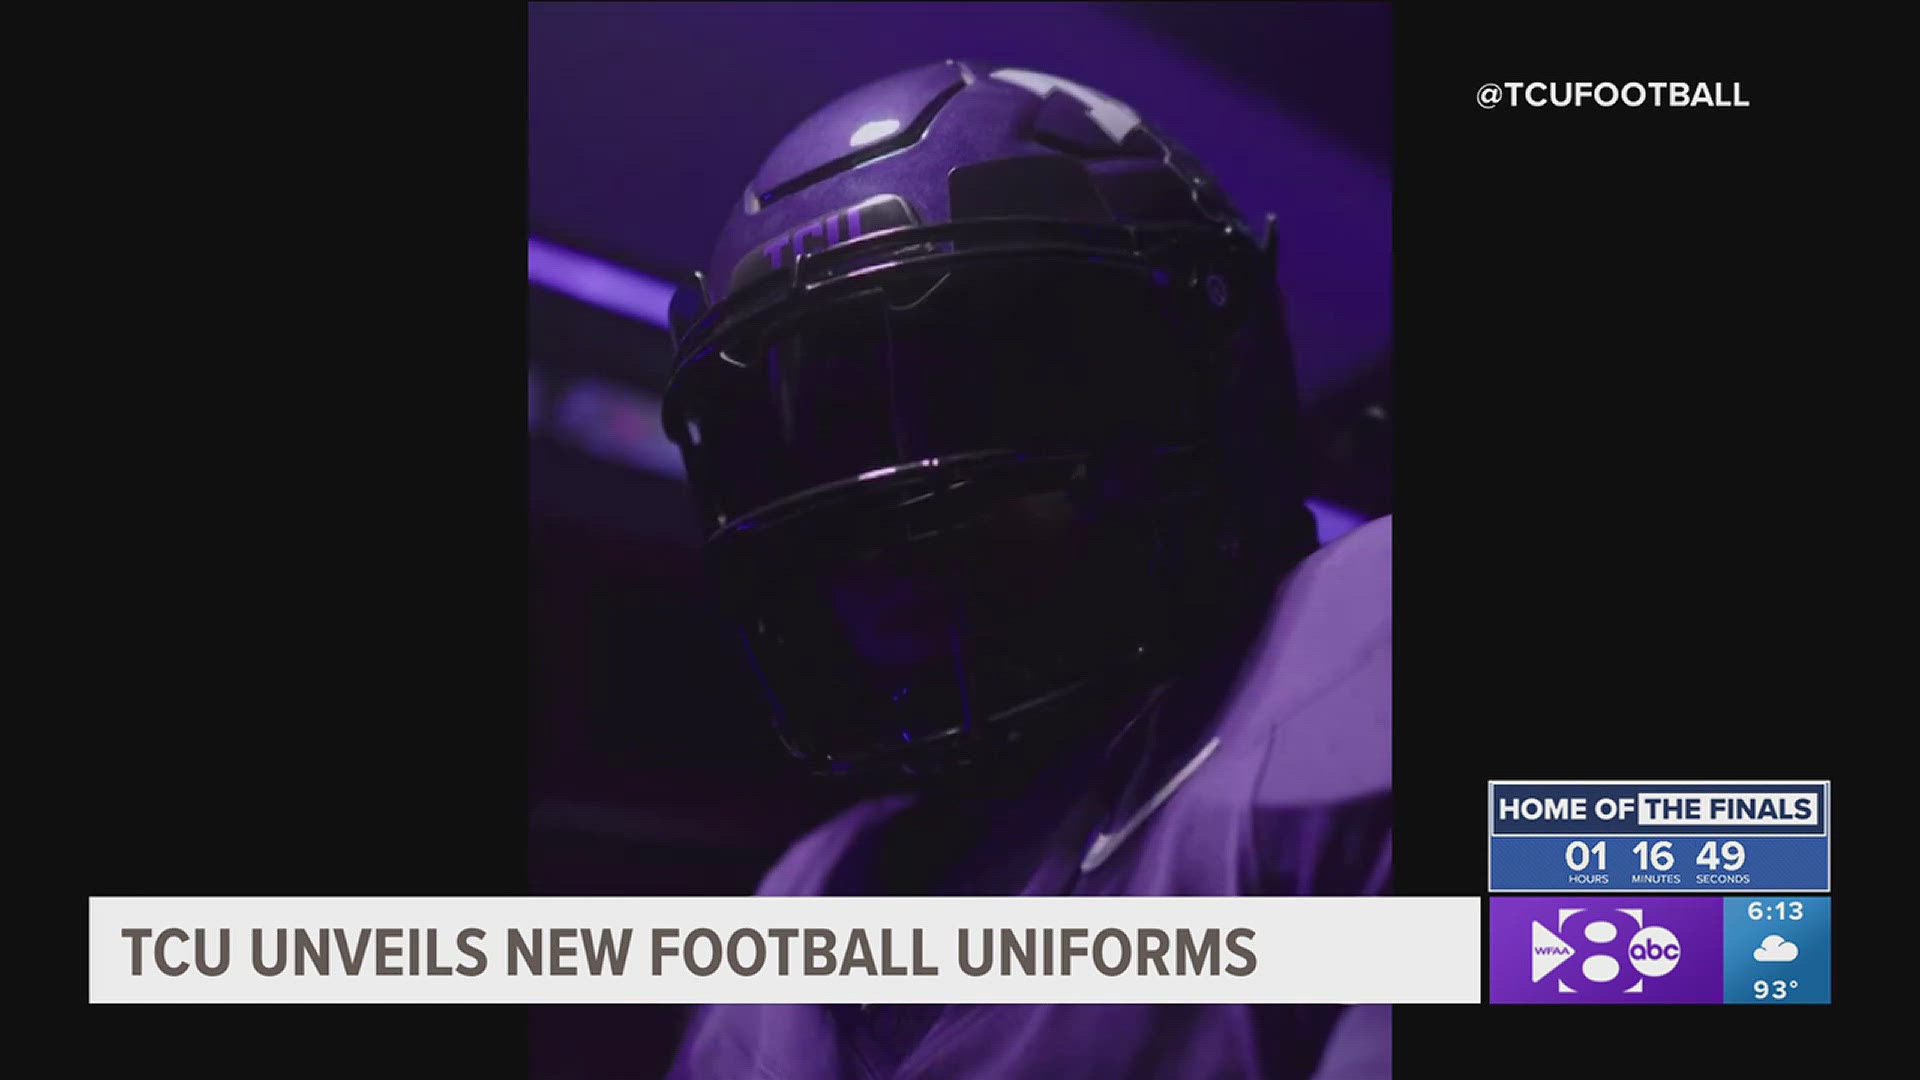 The TCU Horned Frogs debuted a new look.